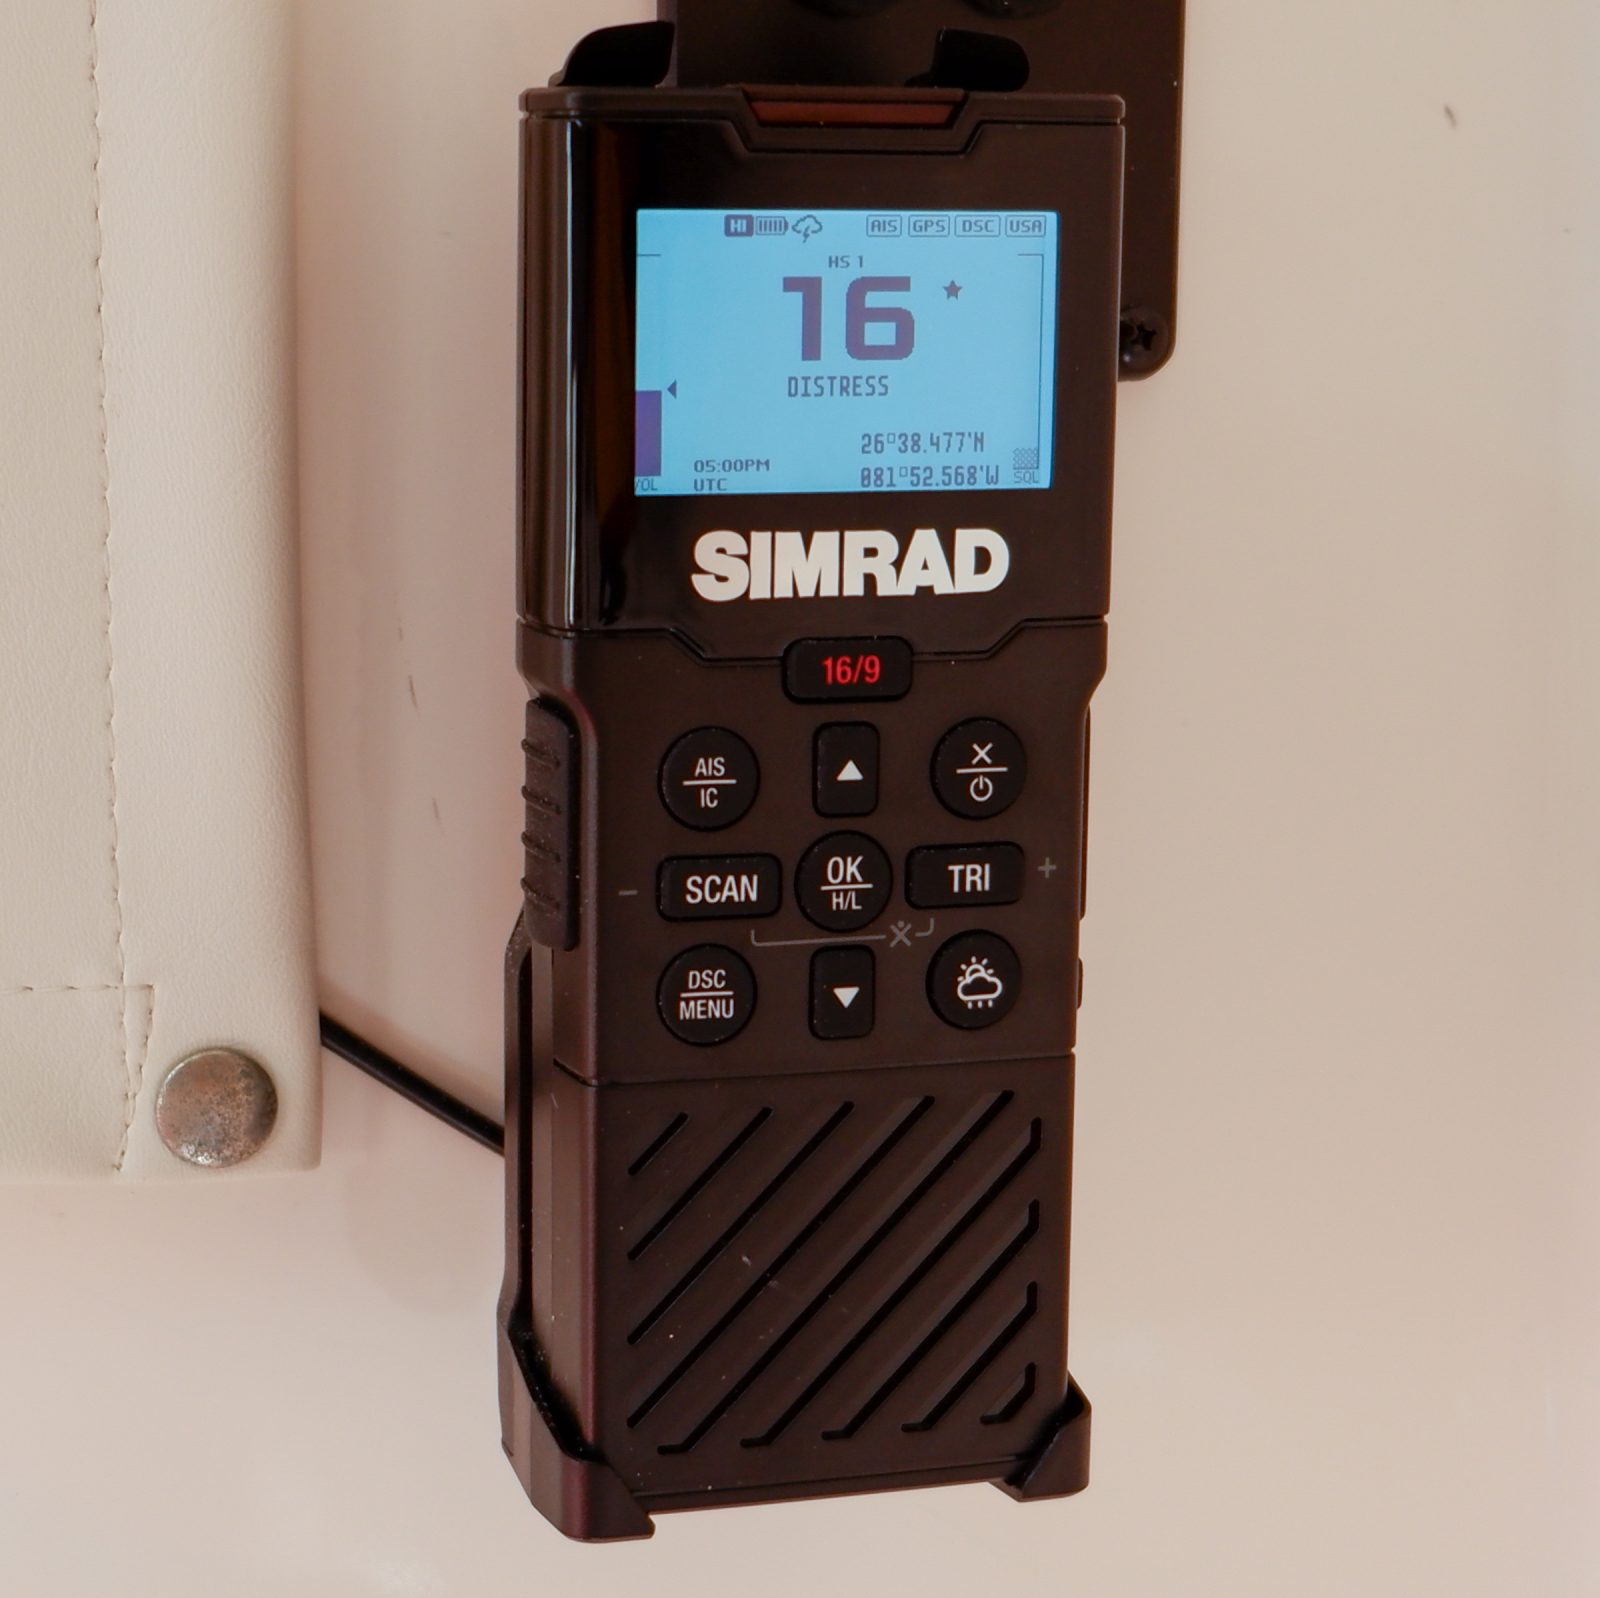 hi-res-image-the-smartgyro-application-is-available-on-simrad-series